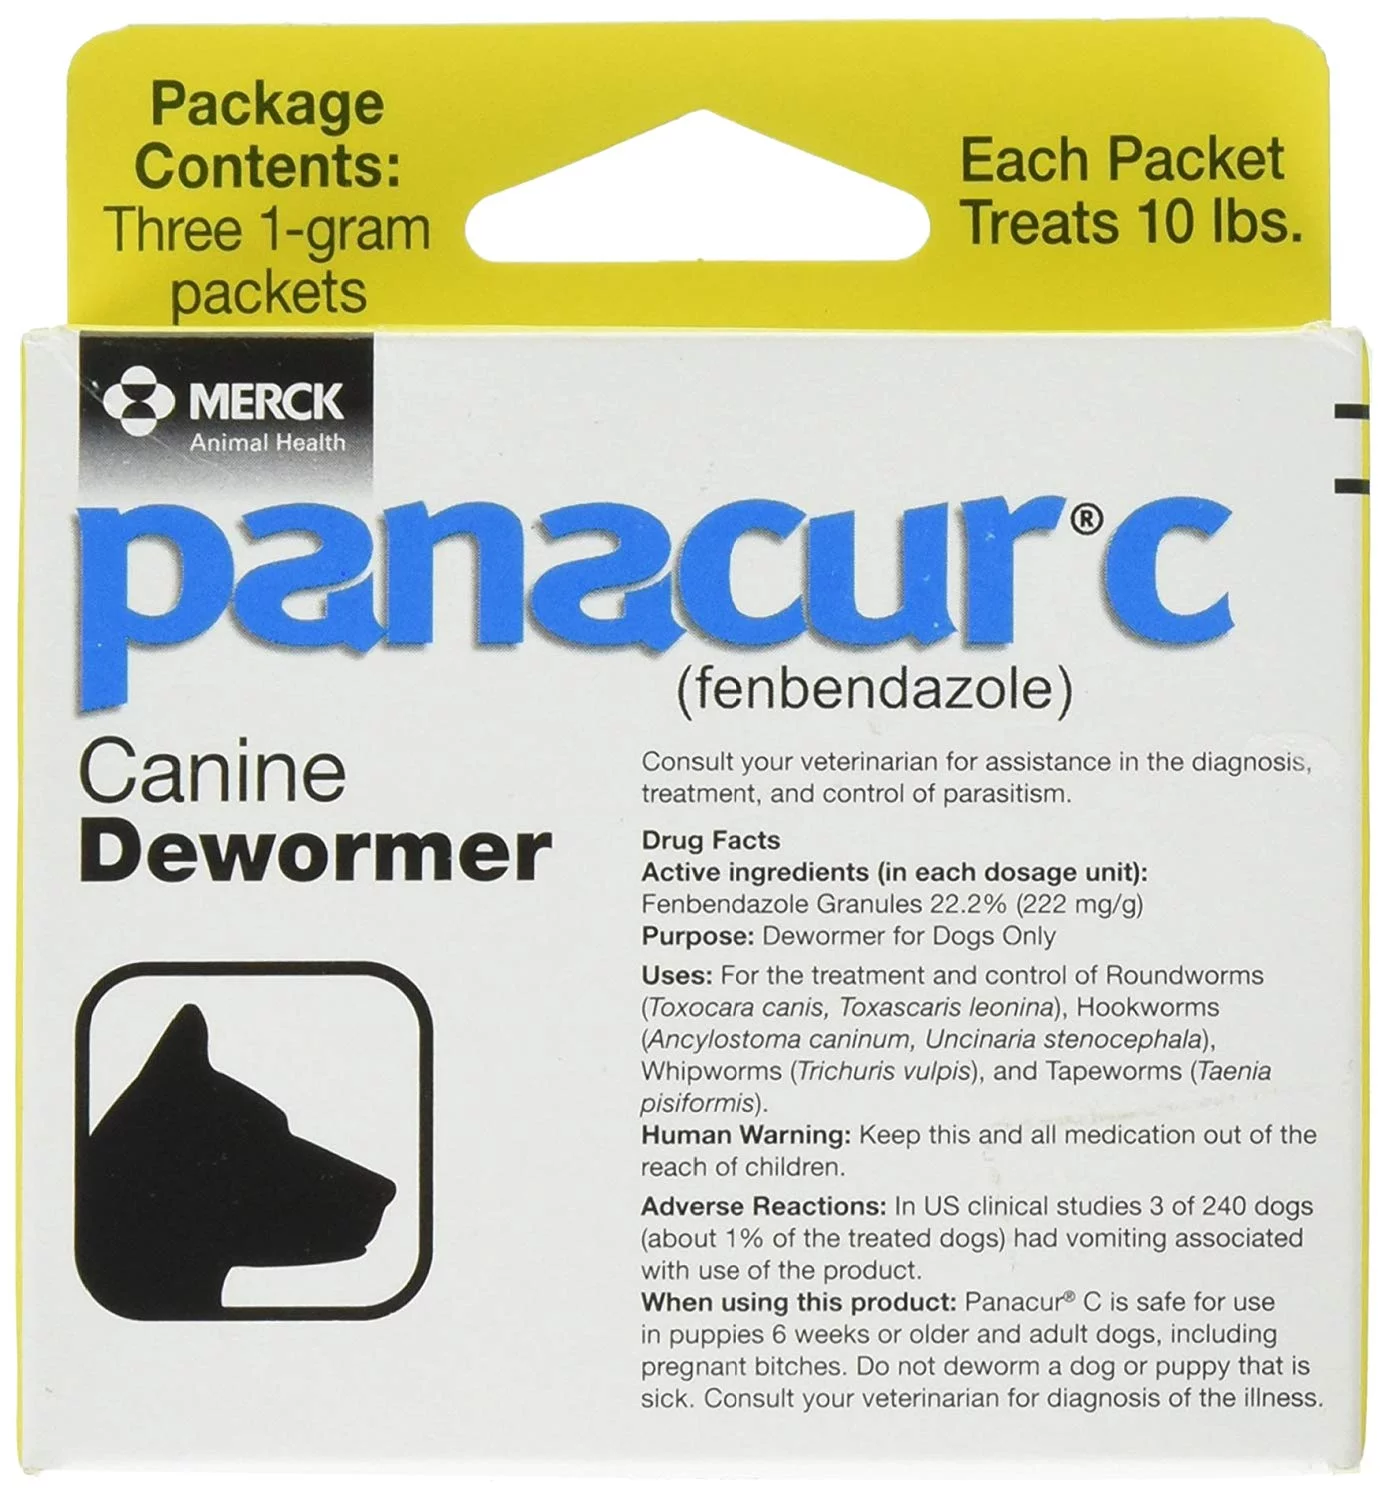 Panacur C Dewormer (Fenbendazole) for Dogs, Three 1-Gram Packets (10 Pounds)